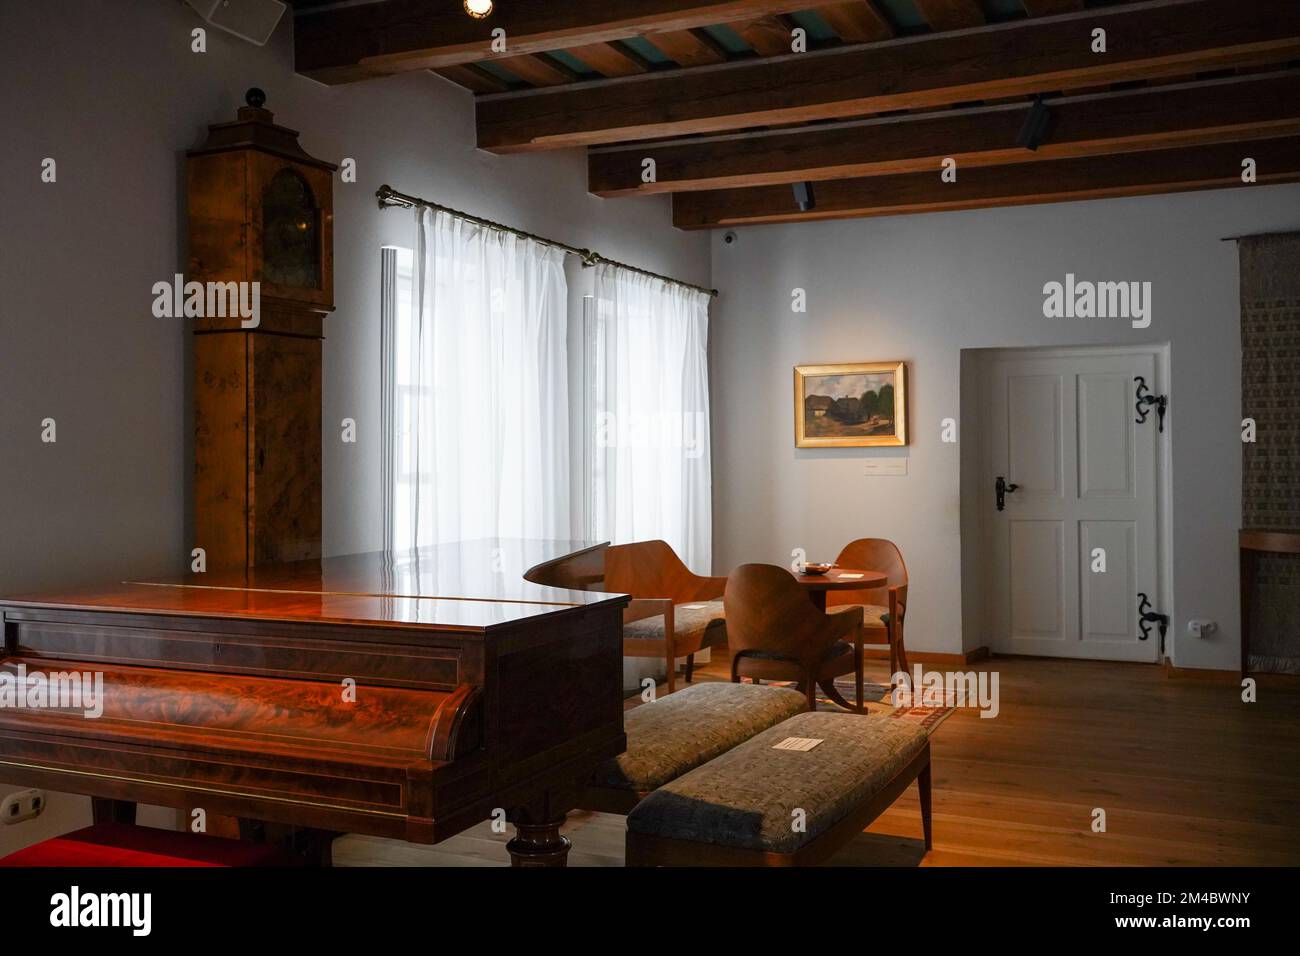 Room in old manor-house which is the Birthplace of Frederic Chopin in Zelazowa Wola, Poland. There's  brown 19th century Erard - period piano. Stock Photo